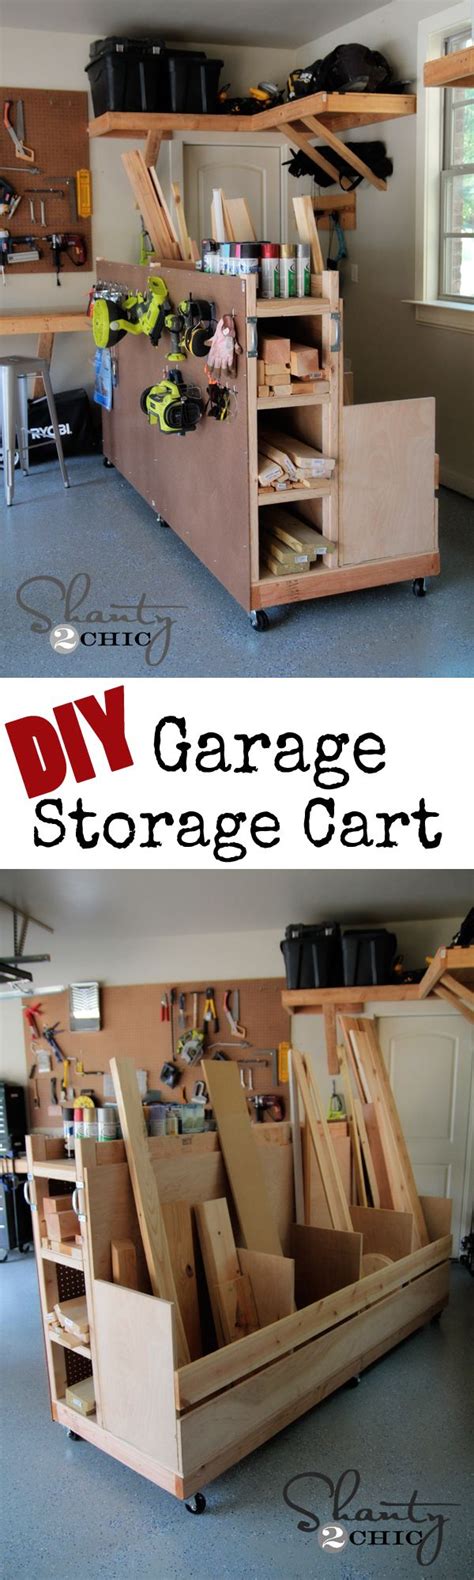 Diy Garage Storage Cart Perfect To Hold Wood And All The Goodies In